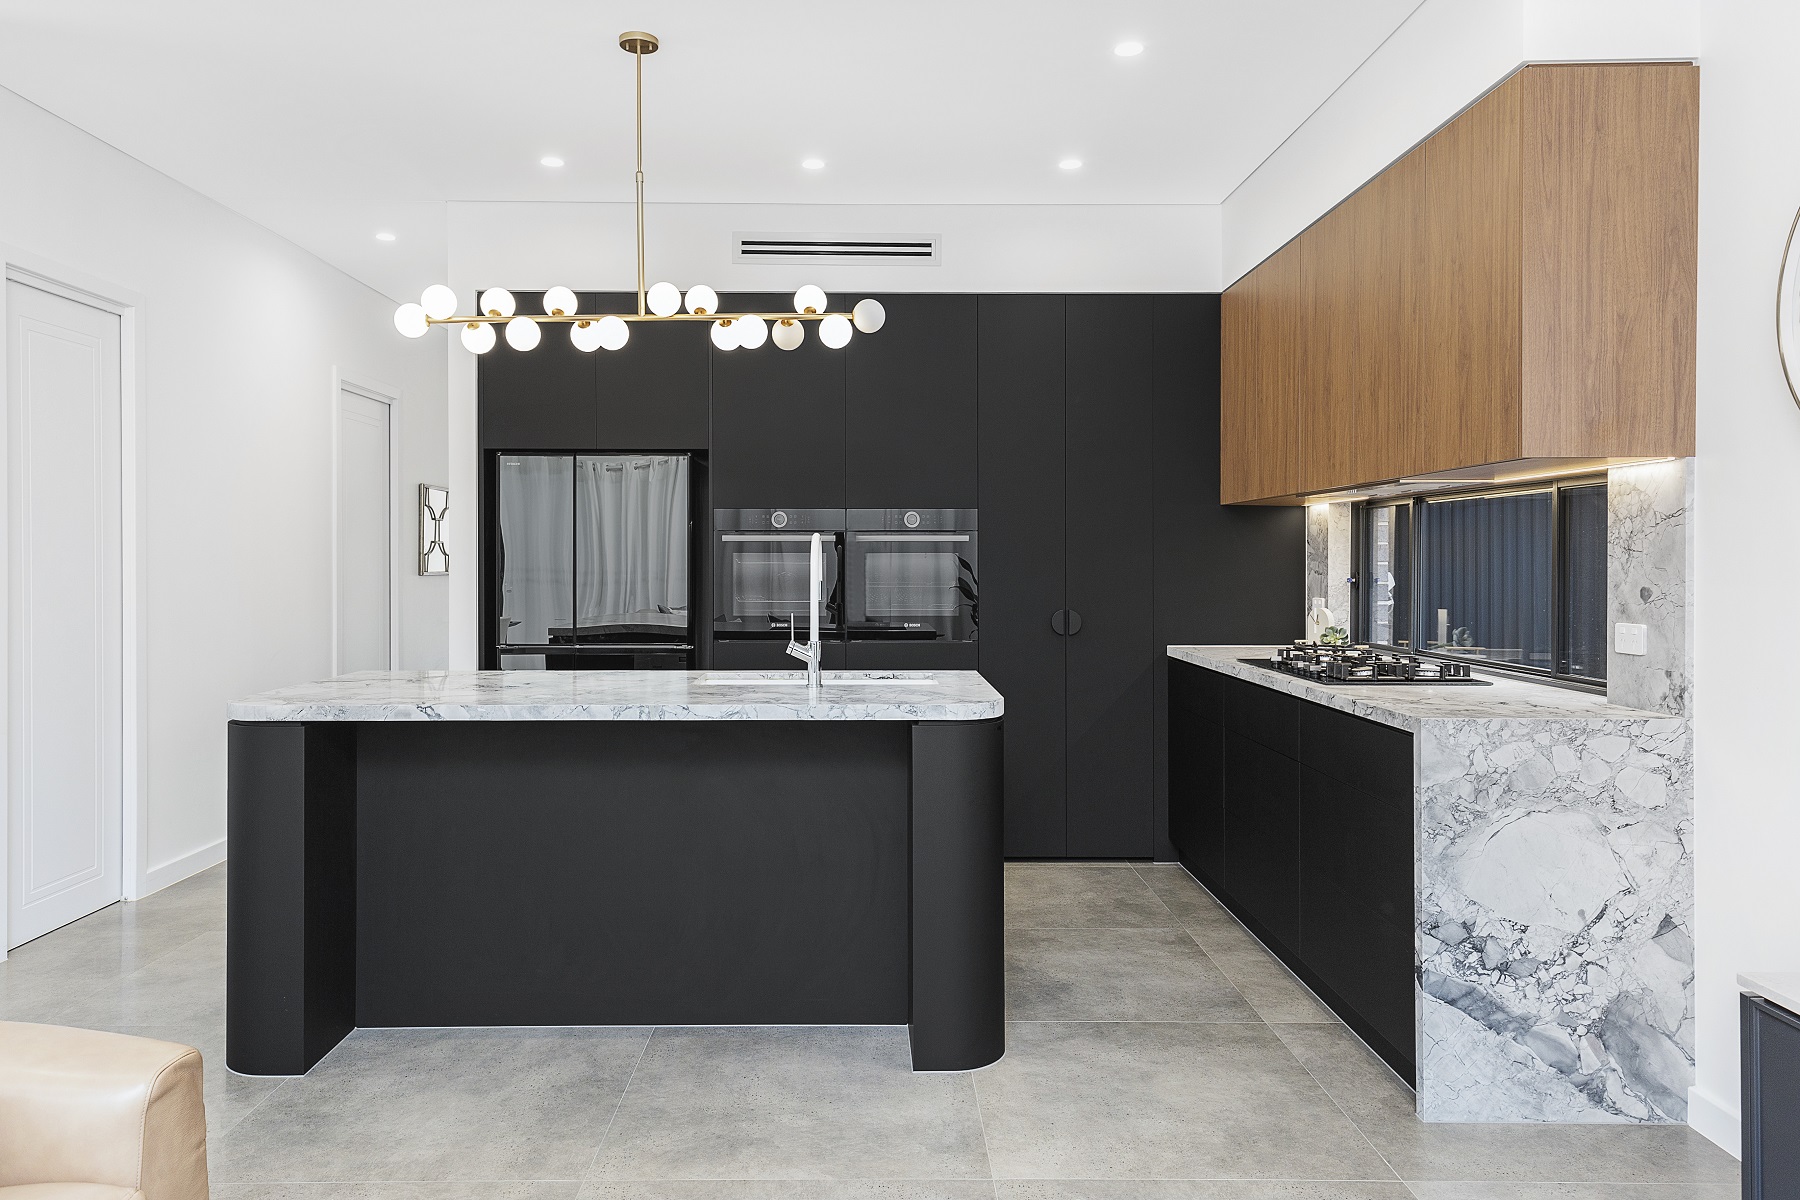 Chipping Norton, Matt black kitchen featuring Super White Stone benches and a curved edge island